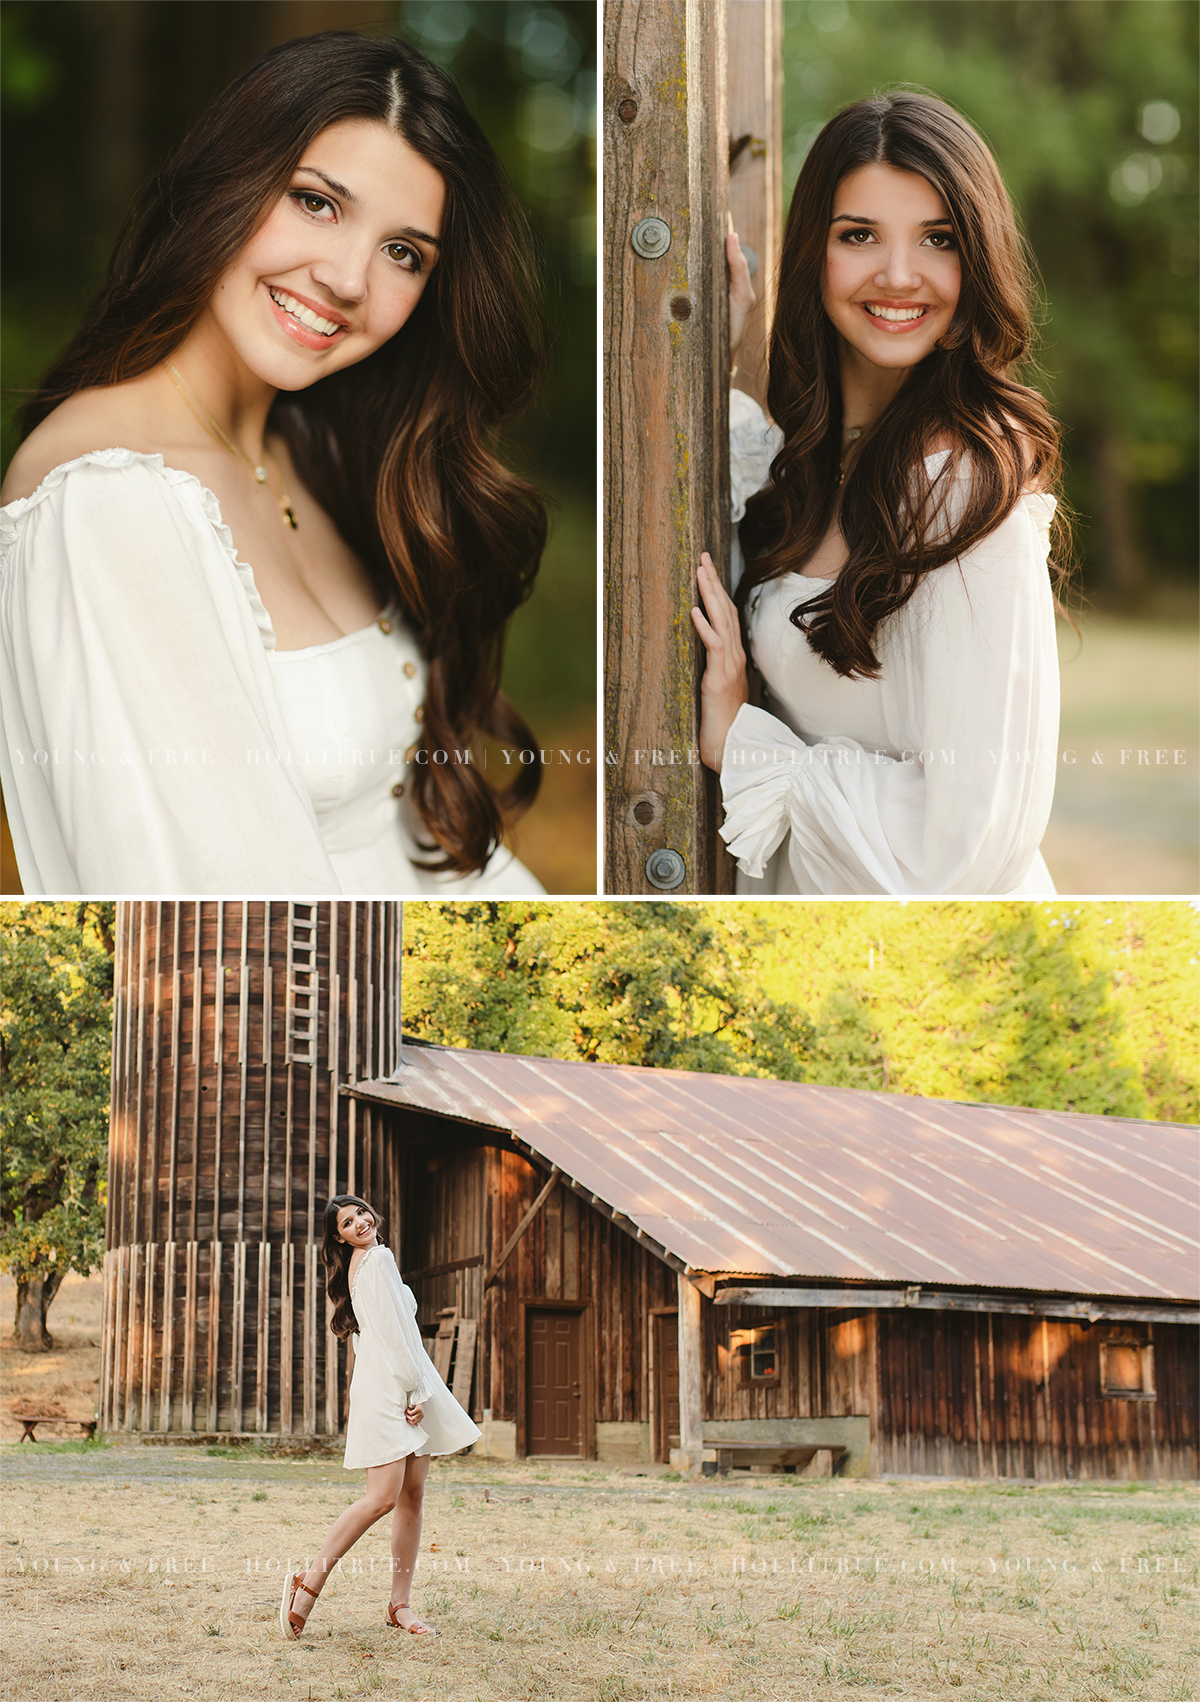 Rustic barn senior photos with a girl in a dress at sunset by Oregon senior portrait photographer, Holli True